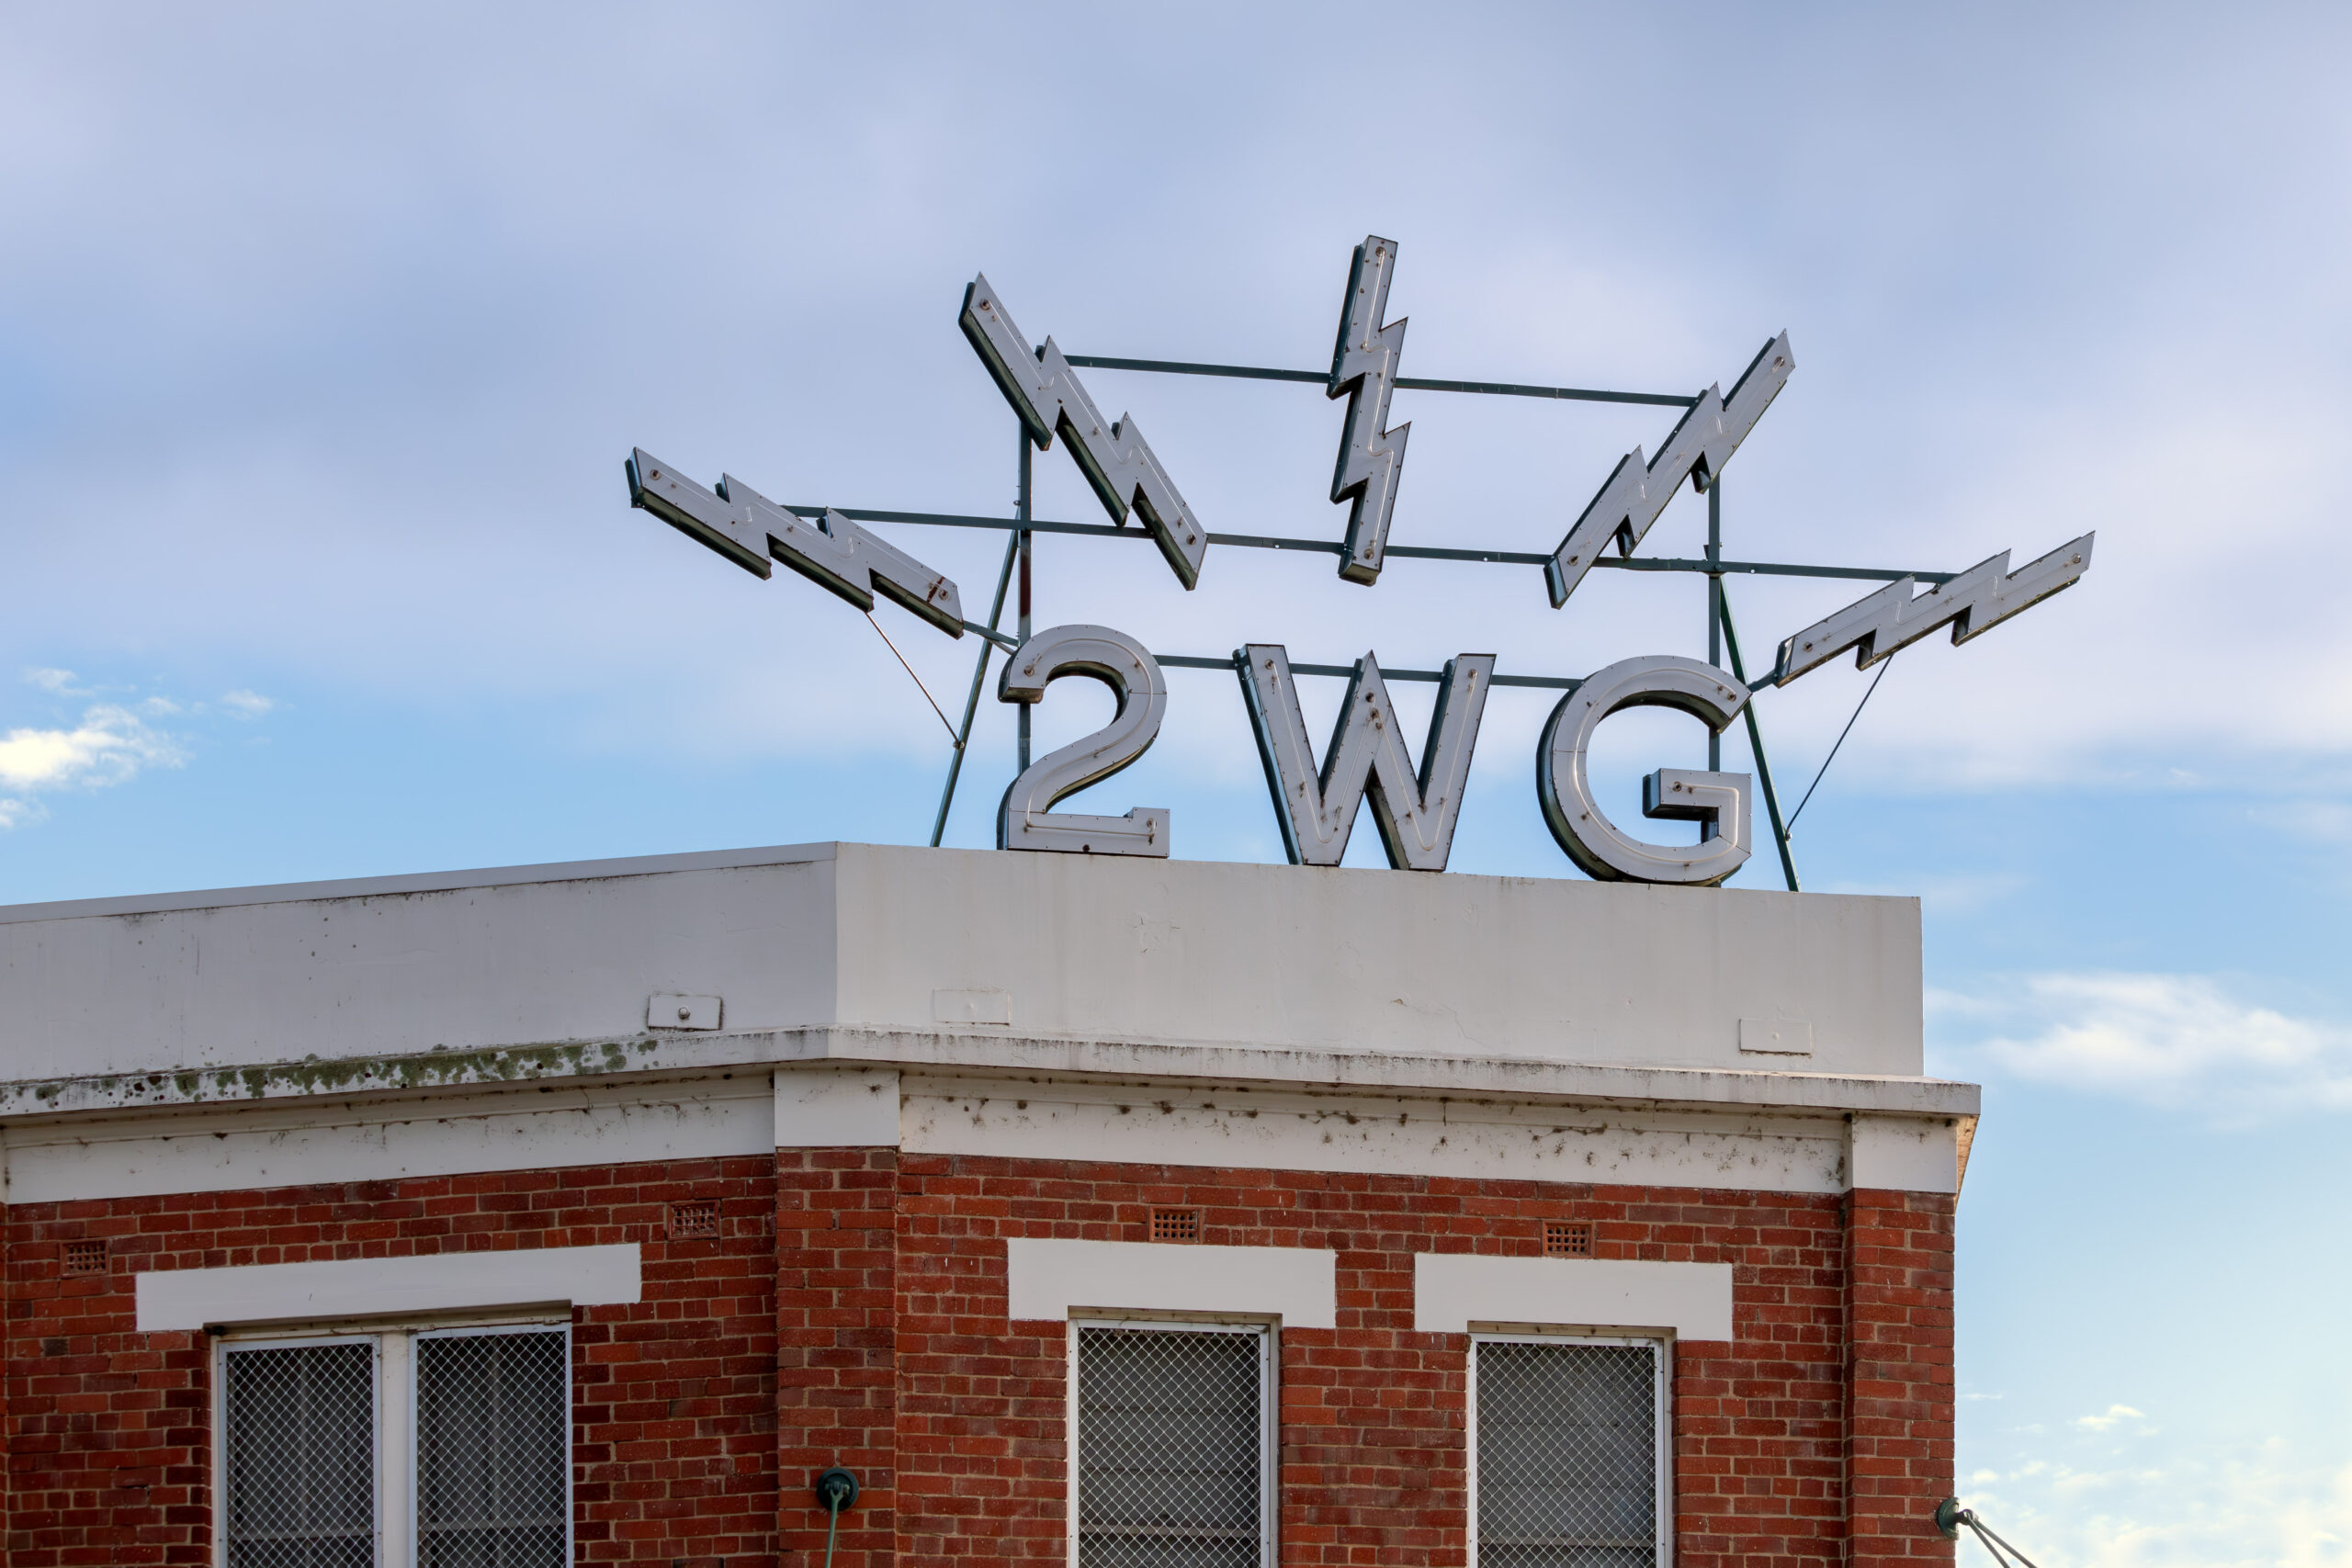 an unilluminated neon sign "2WG" with lightning strikes emanating from the letters, sits atop a red brick building